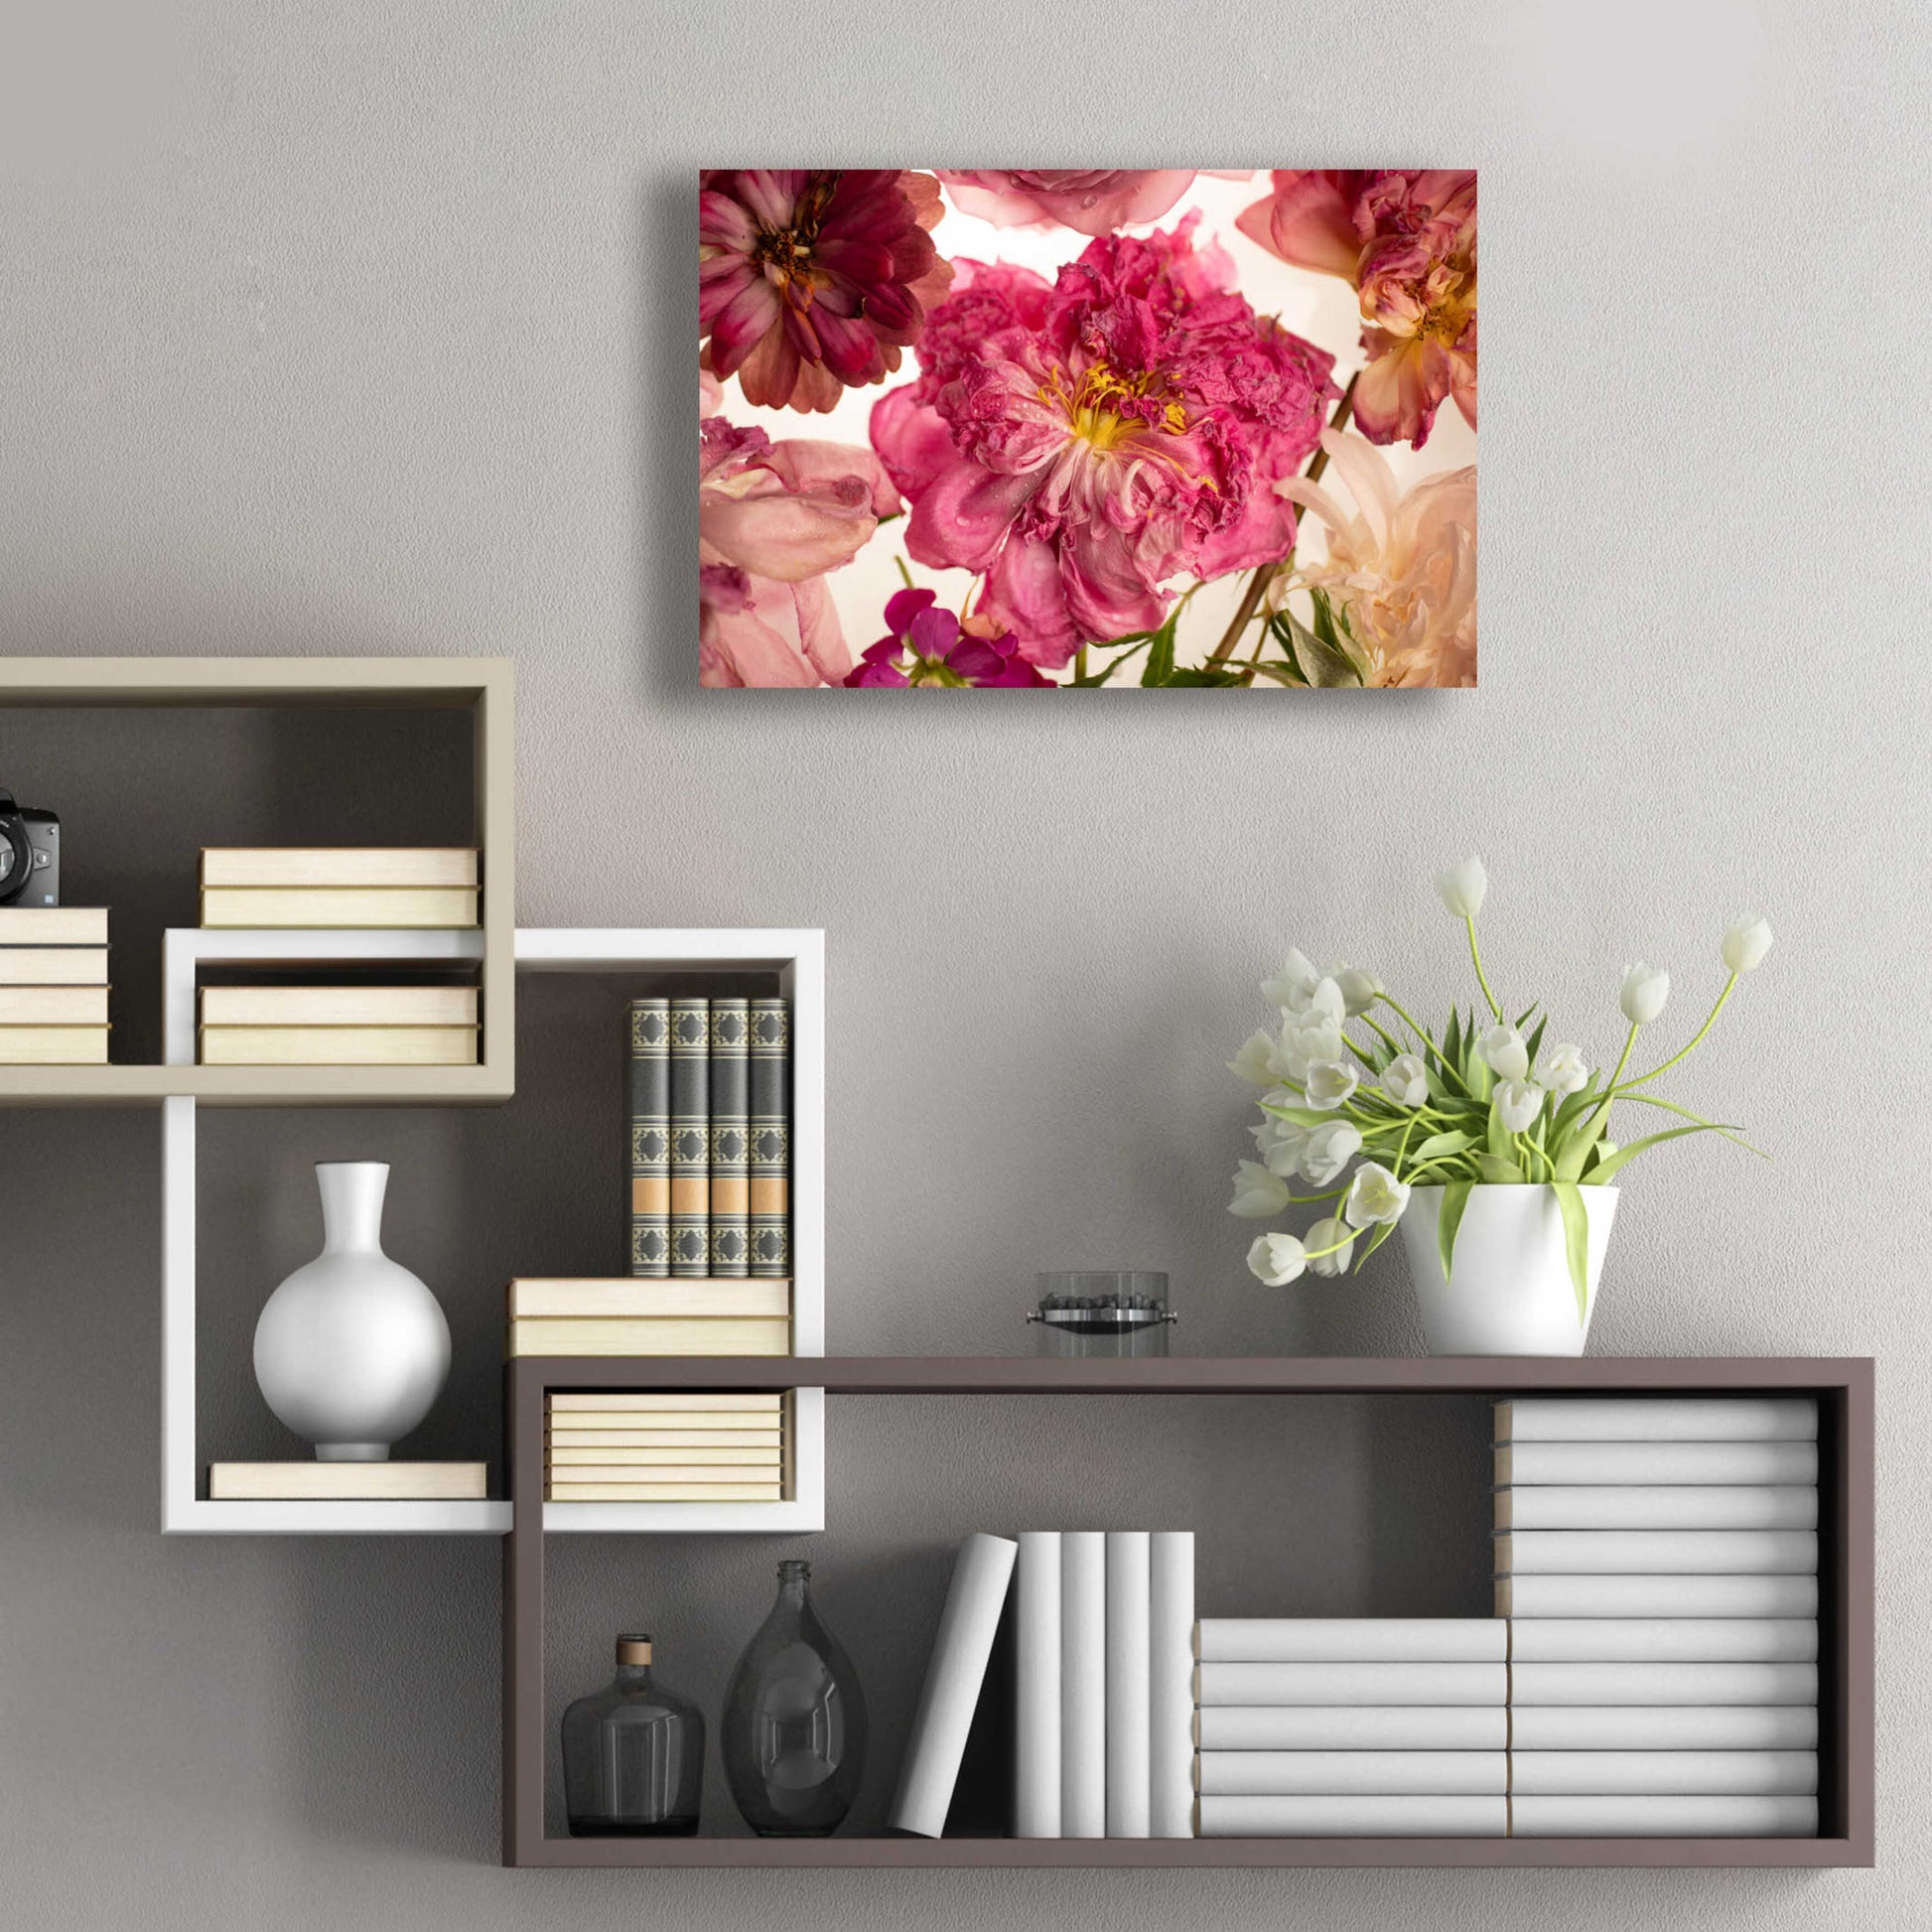 Epic Art 'Peony on White' by Leah McLean, Acrylic Glass Wall Art,24x16